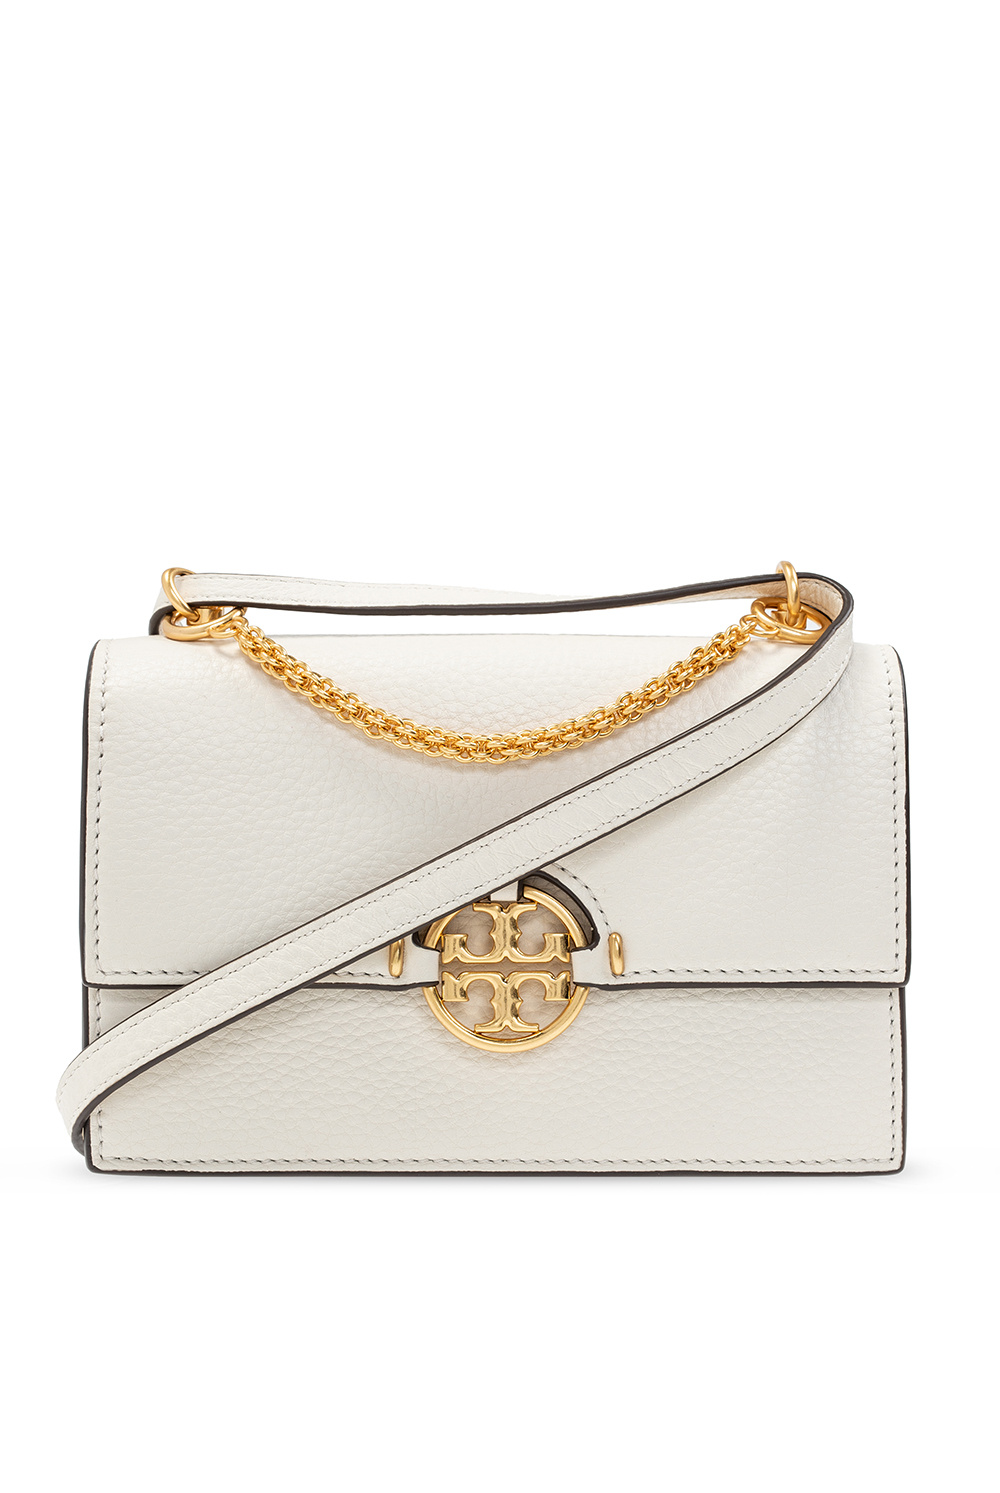 Tory Burch Miller Leather Shoulder Bag in New Ivory